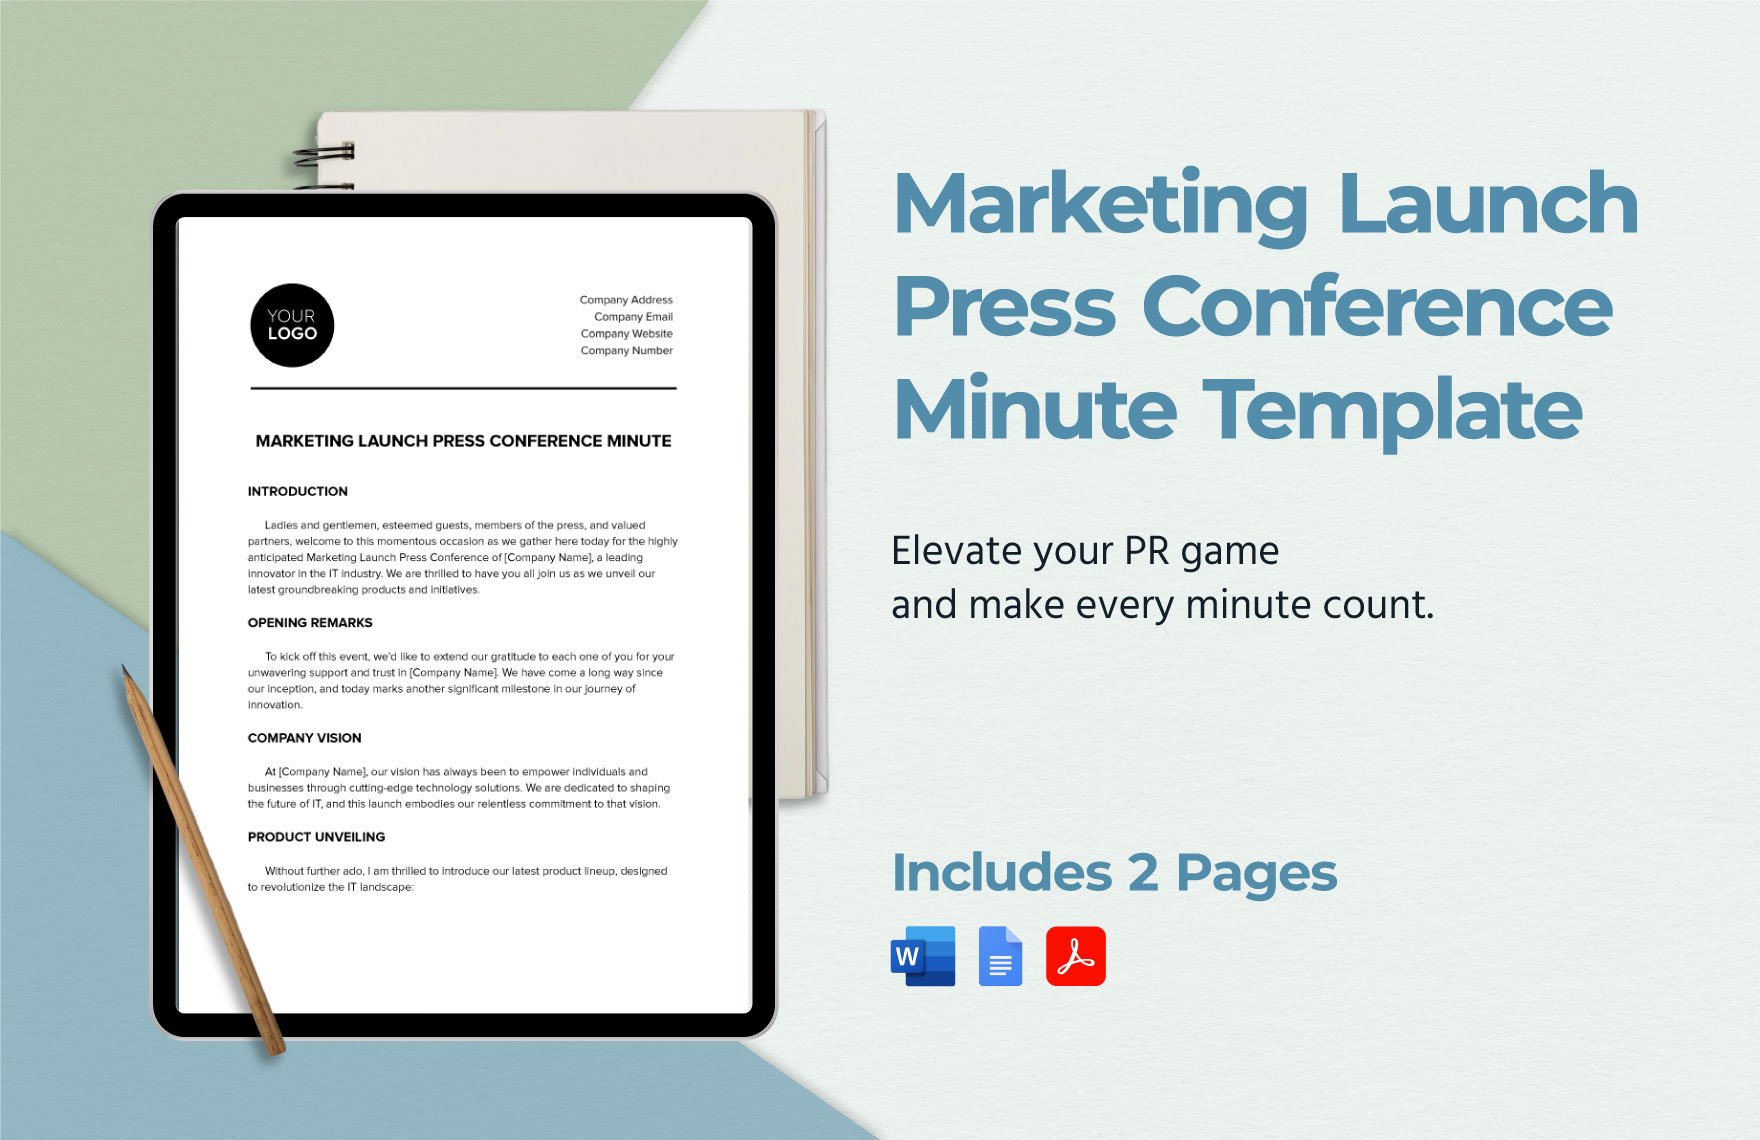 Marketing Launch Press Conference Minute Template